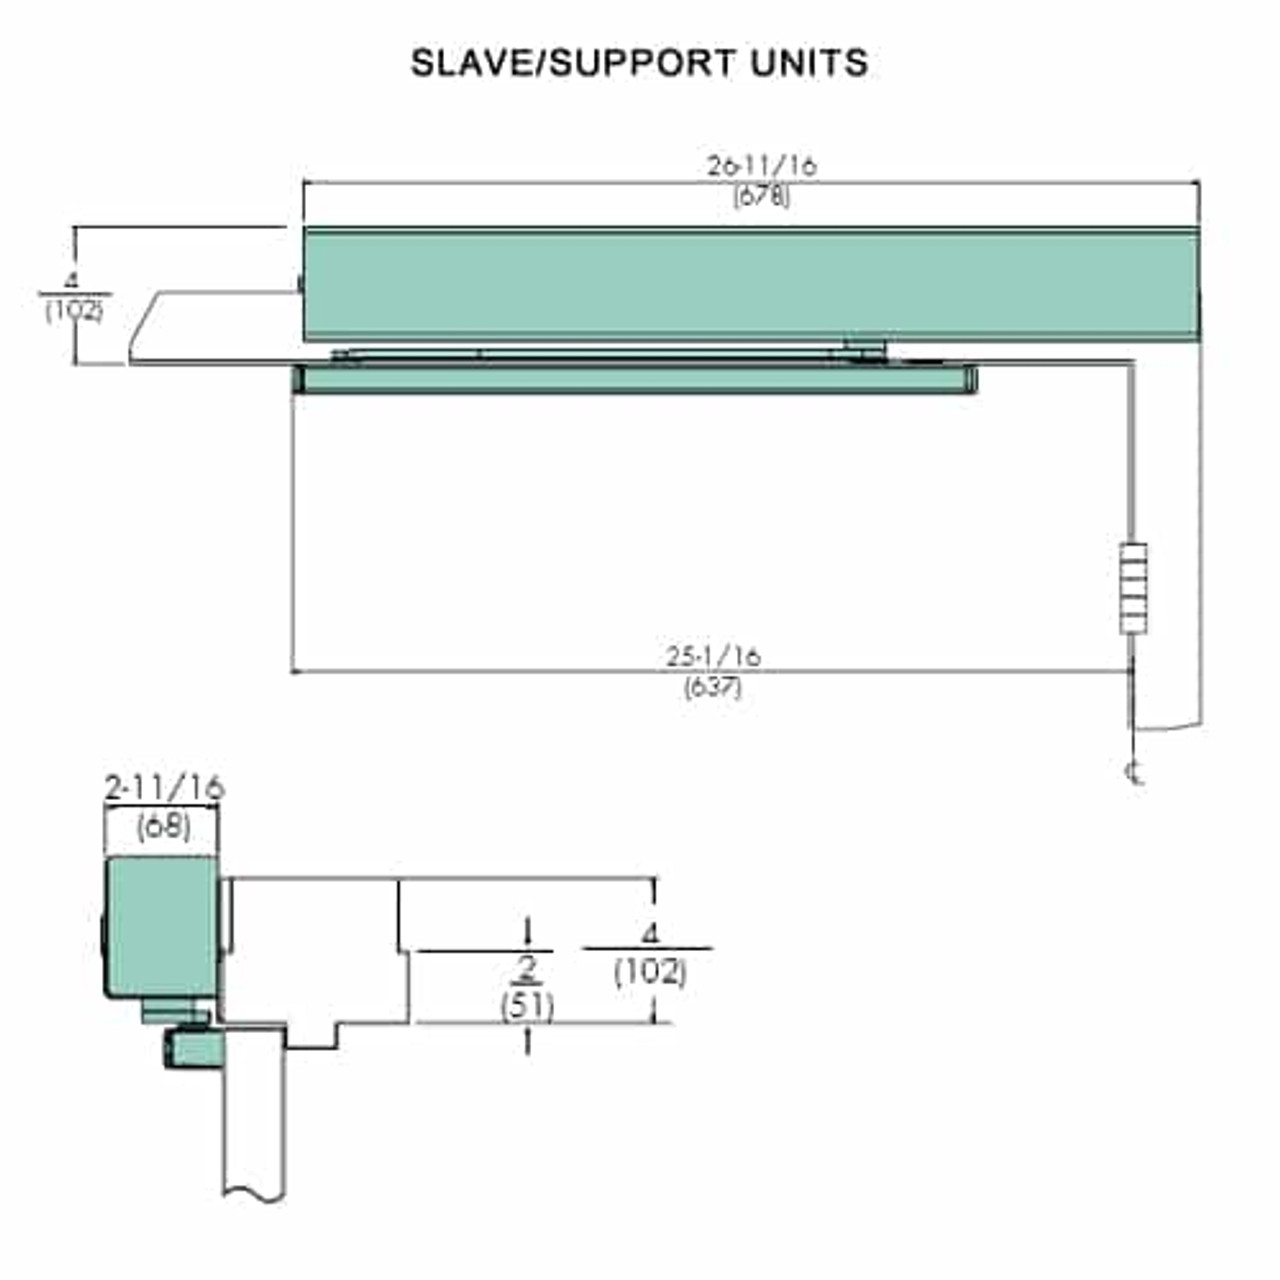 7253MPSO-LH-24VDC-690 Norton 7200 Series Electromechanical Closer and Holder with Double Egress Arm Slide Track Slave/Support Unit in Statuary Bronze Finish